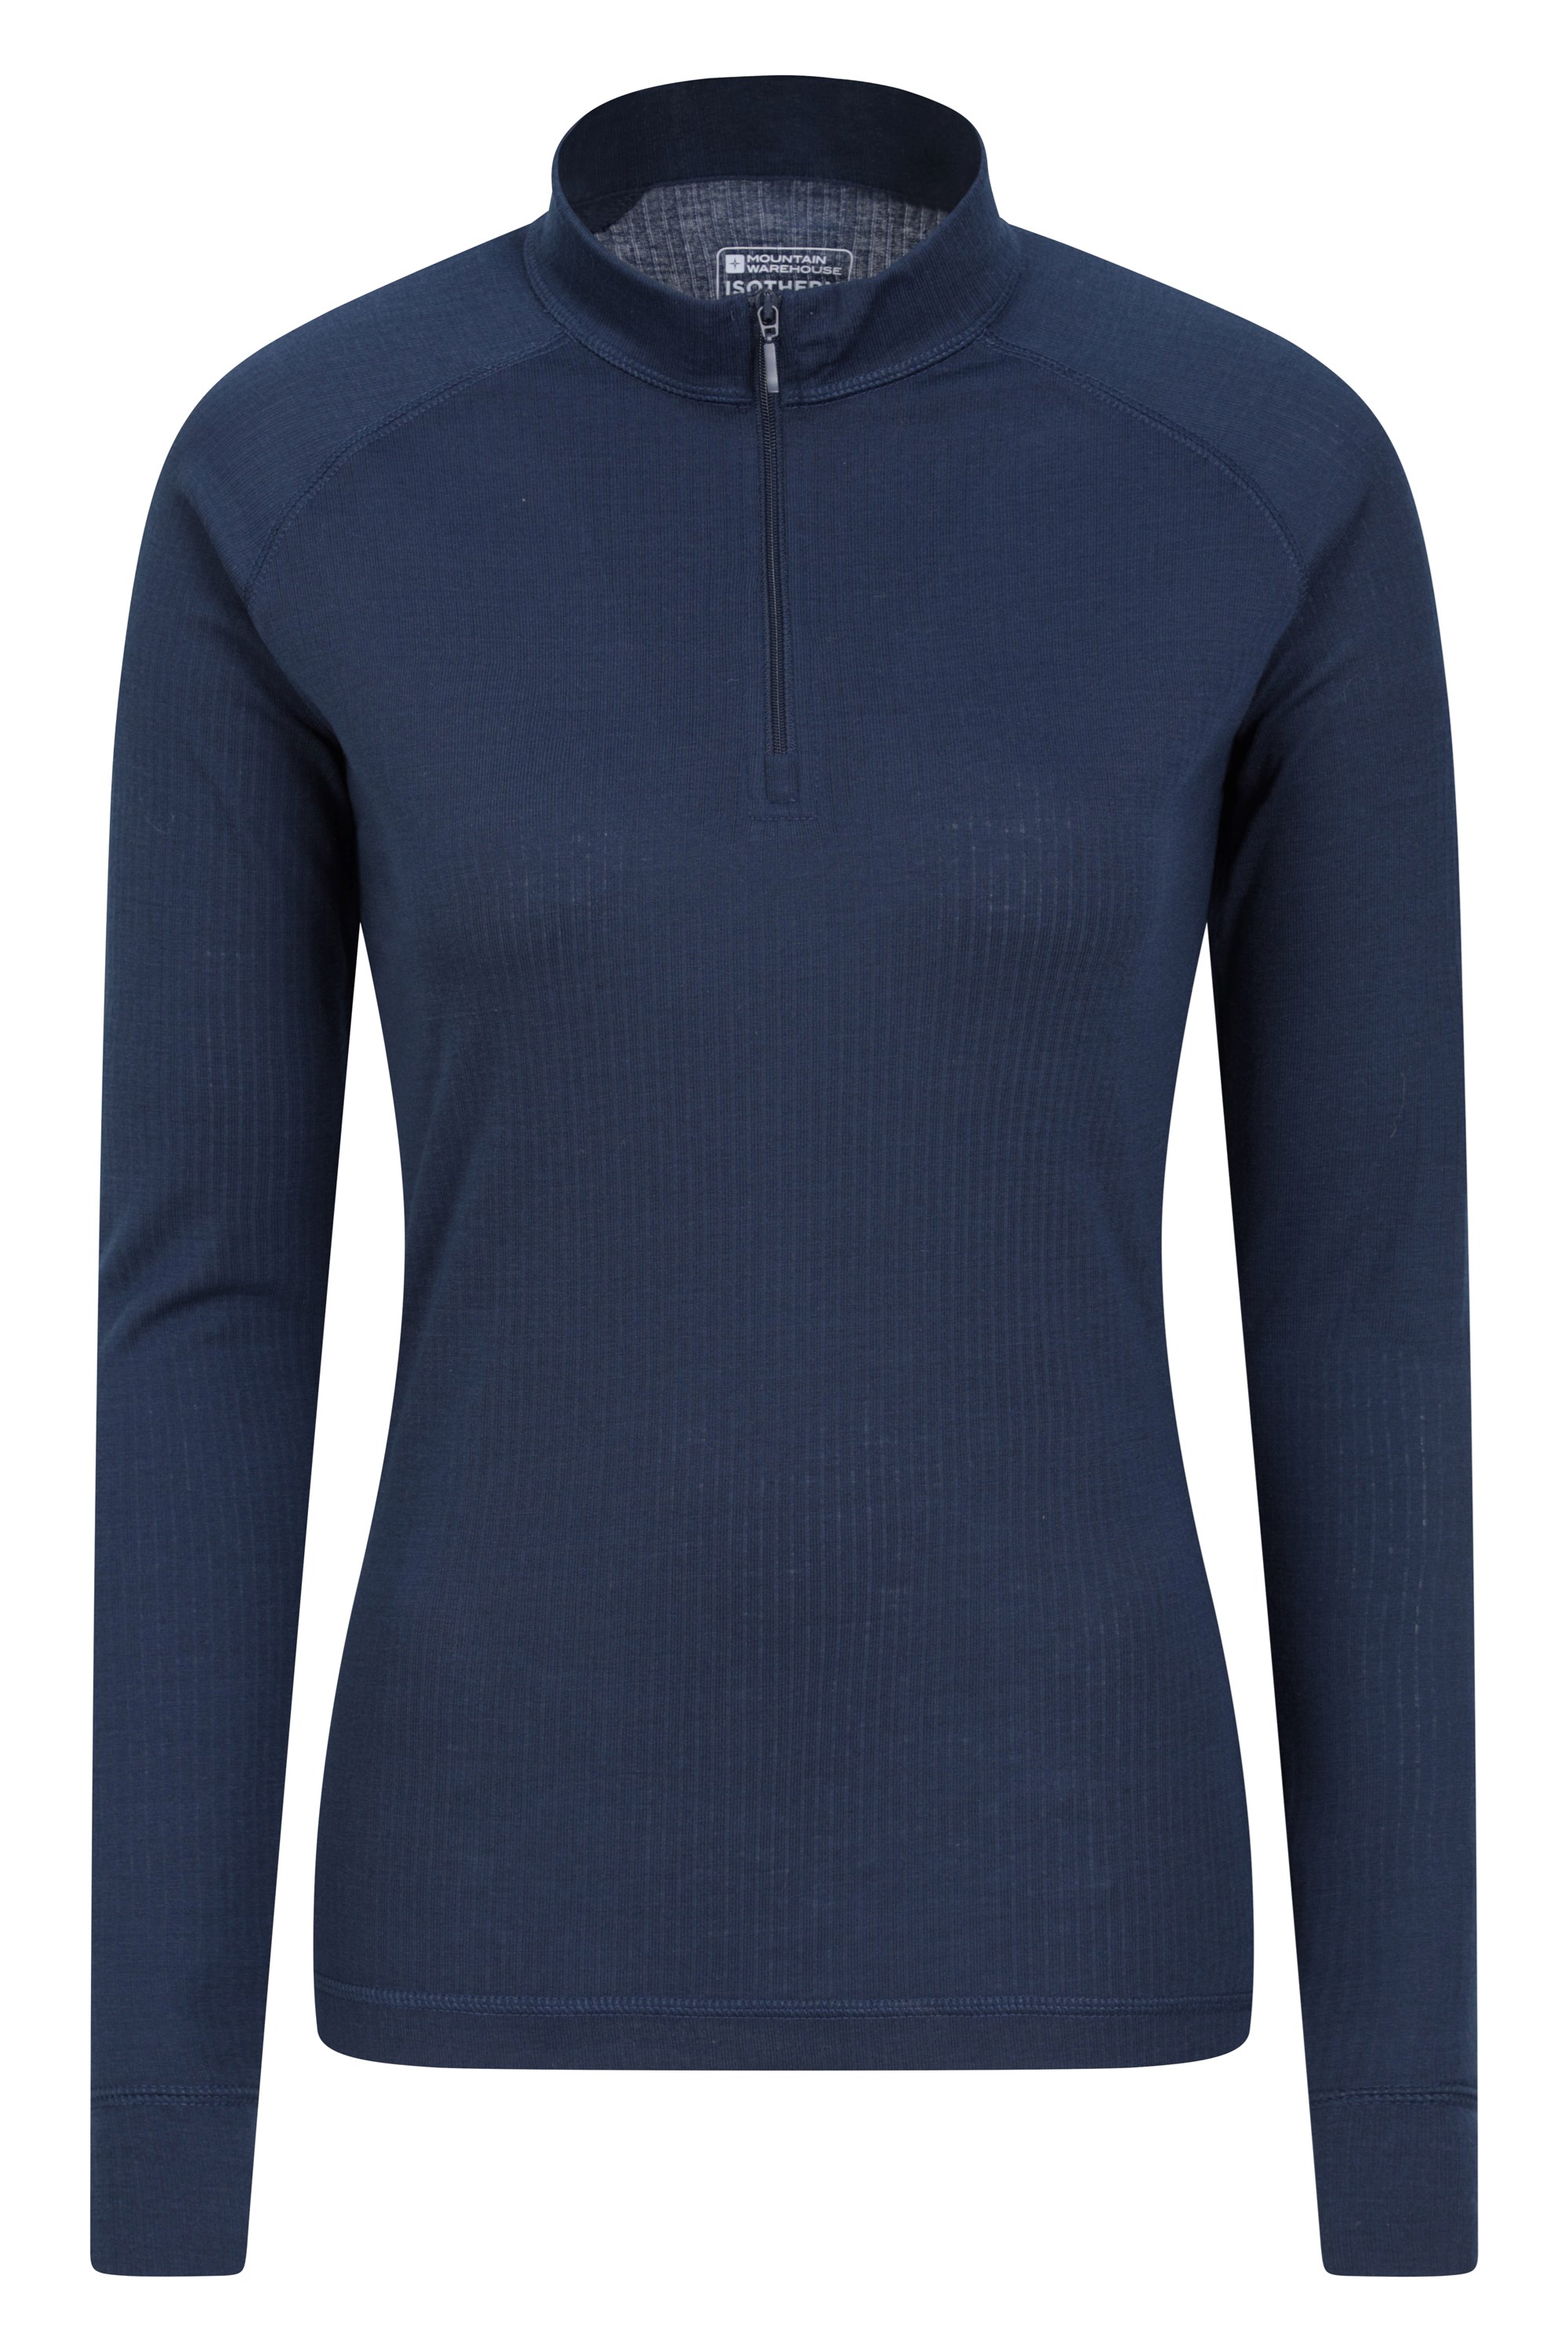 Women's Base Layer Tops, Thermal Tops